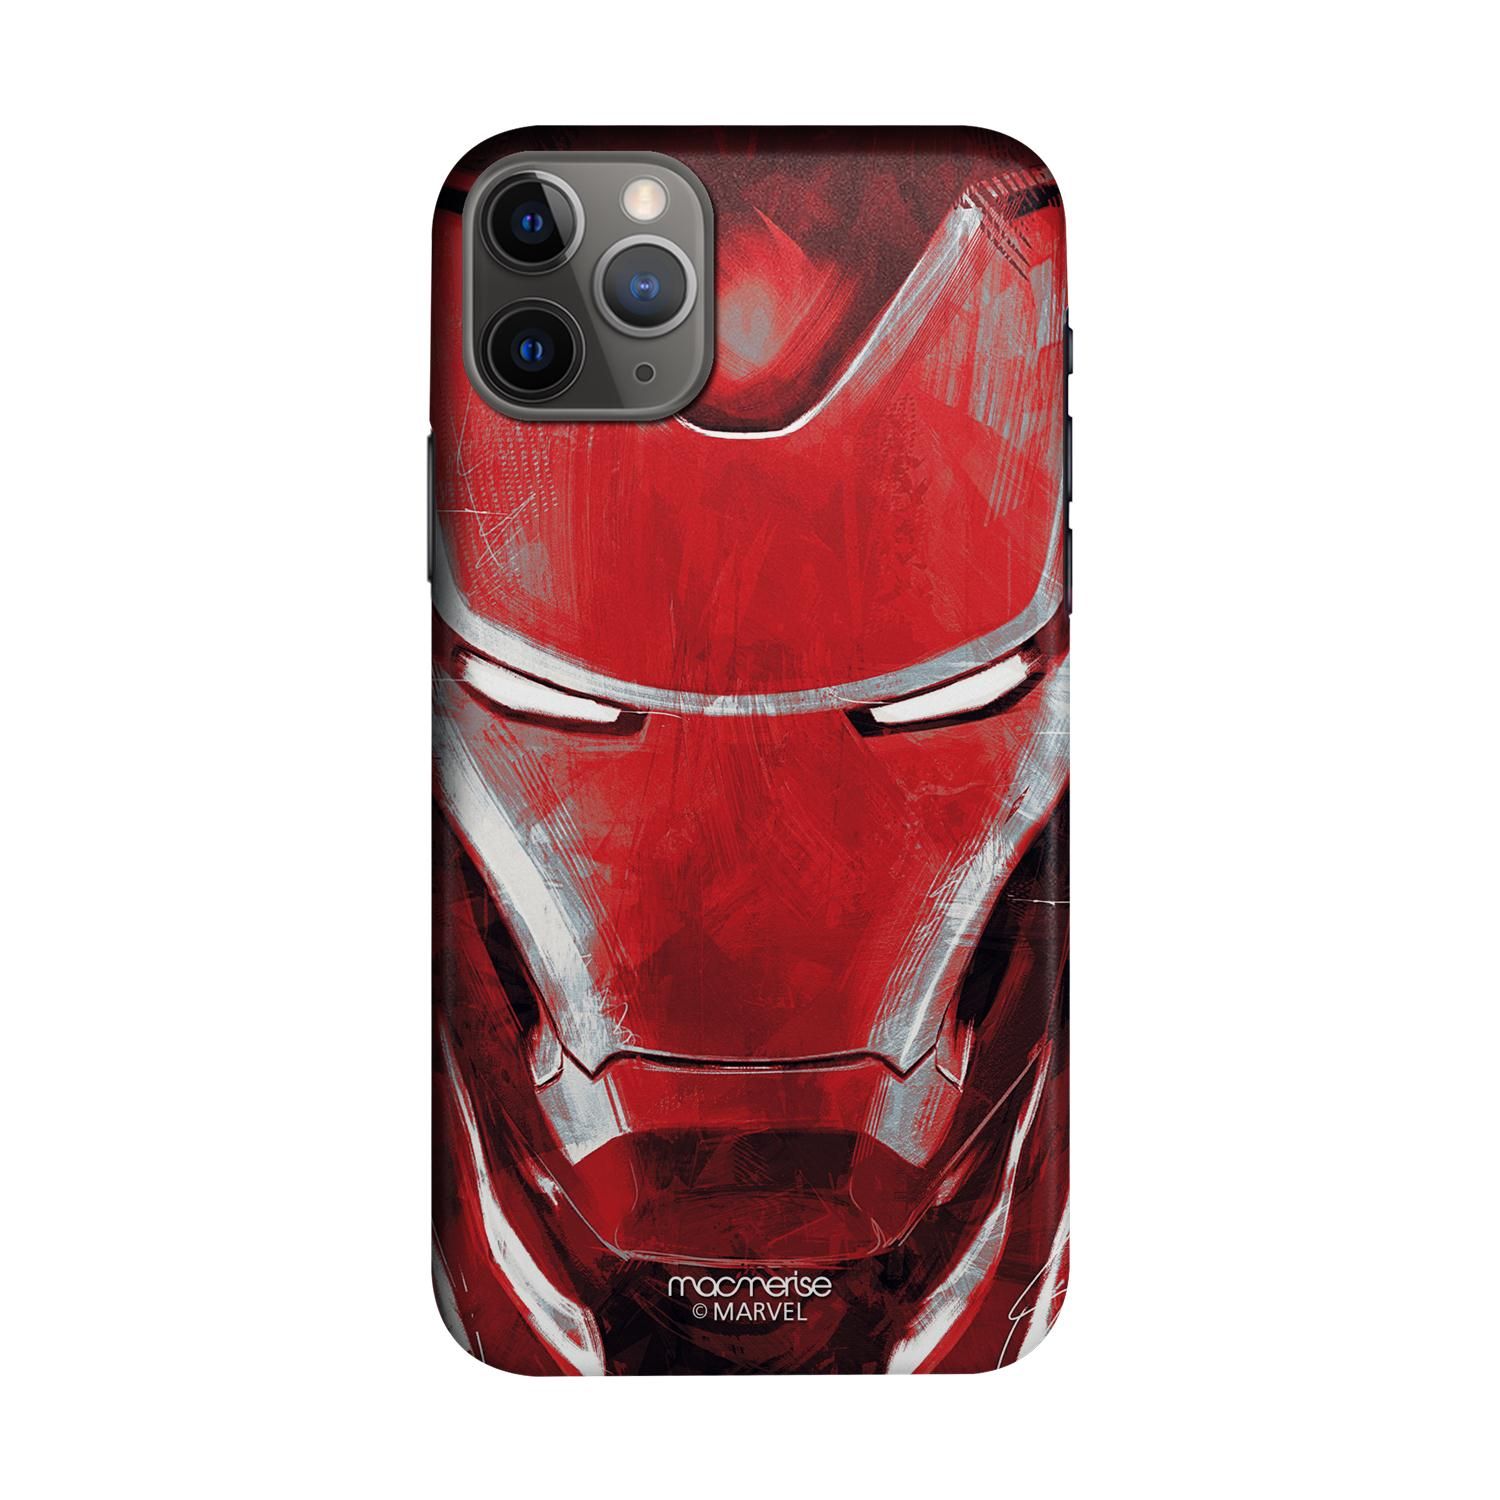 Buy Charcoal Art Iron man - Sleek Phone Case for iPhone 11 Pro Max Online